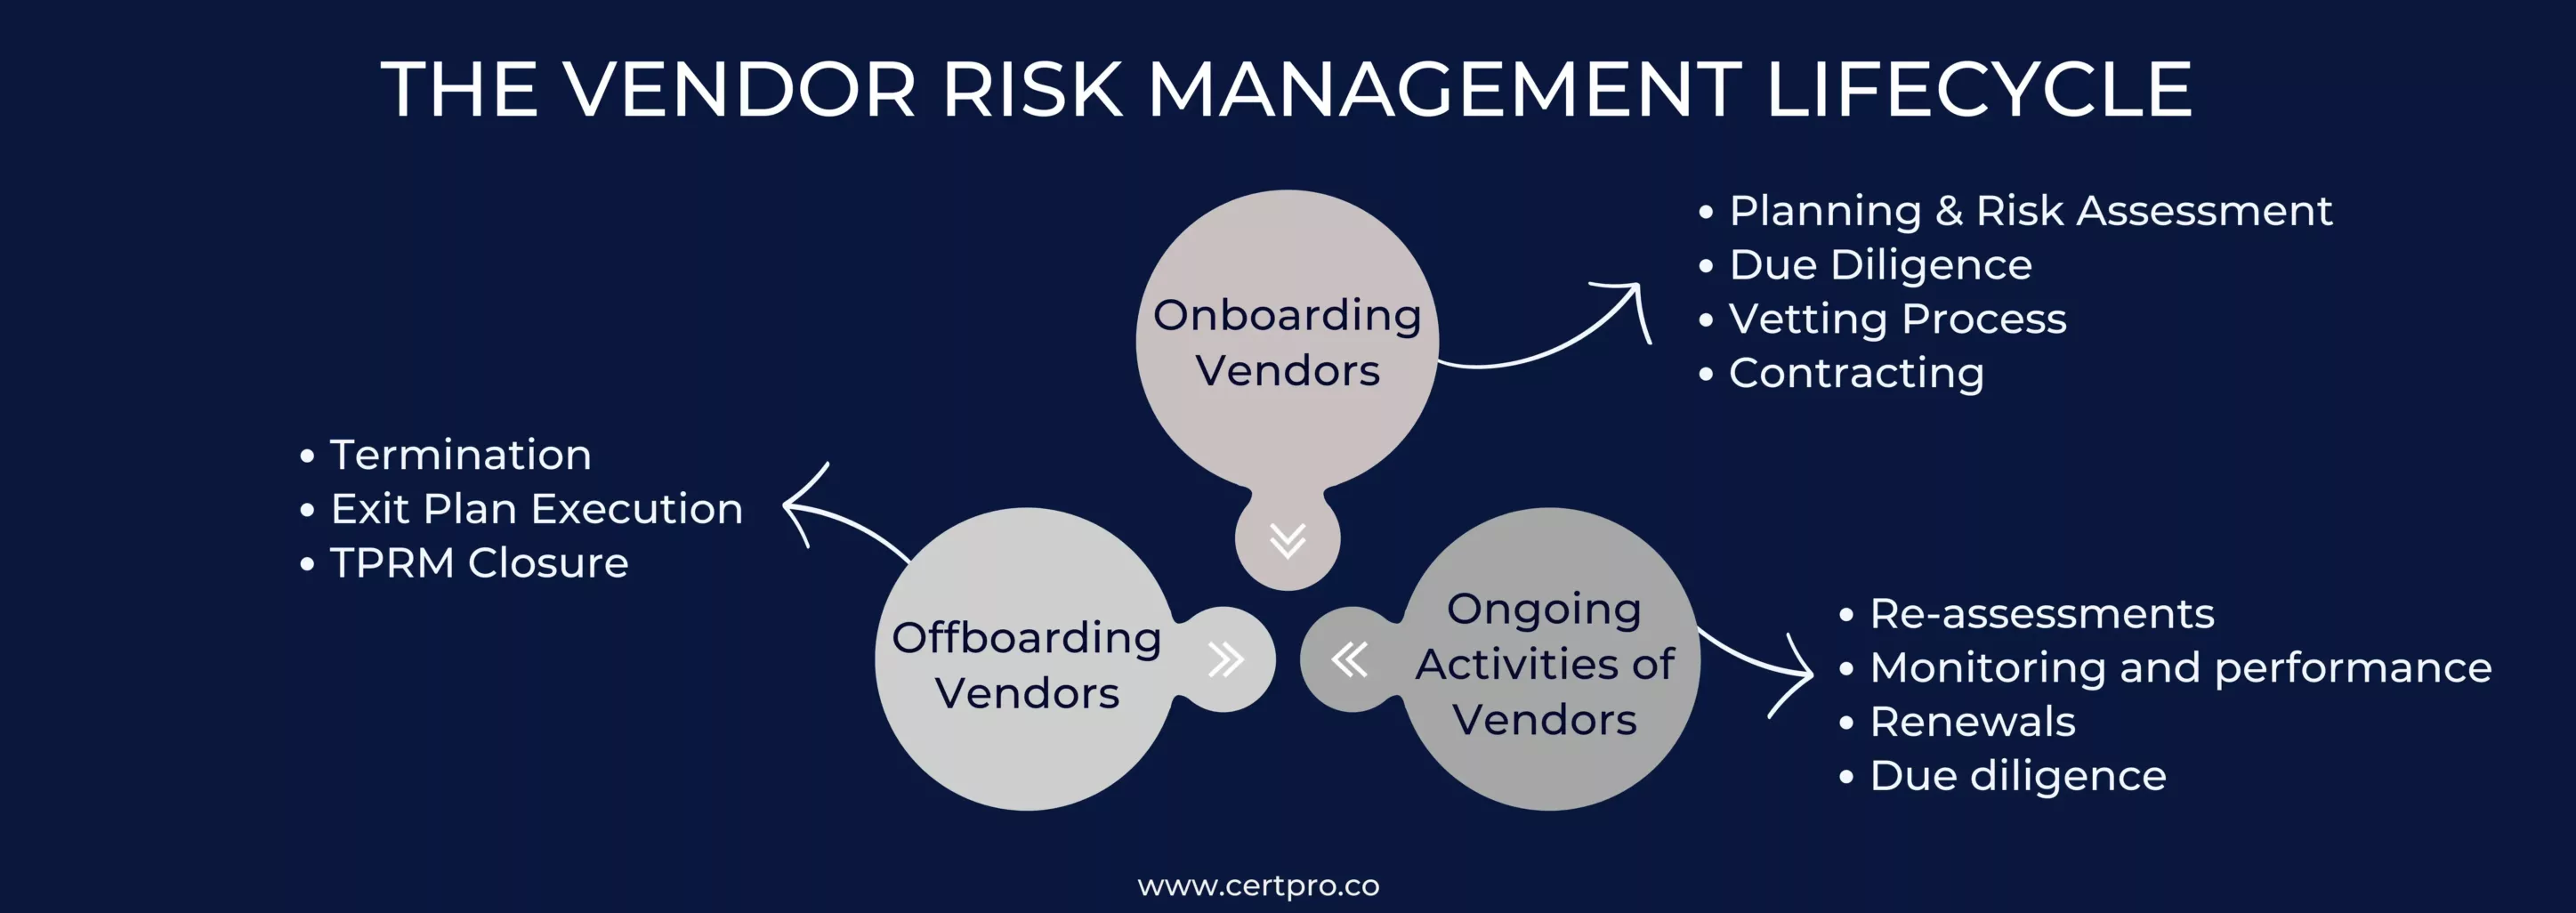 THE VENDOR RISK MANAGEMENT LIFECYCLE